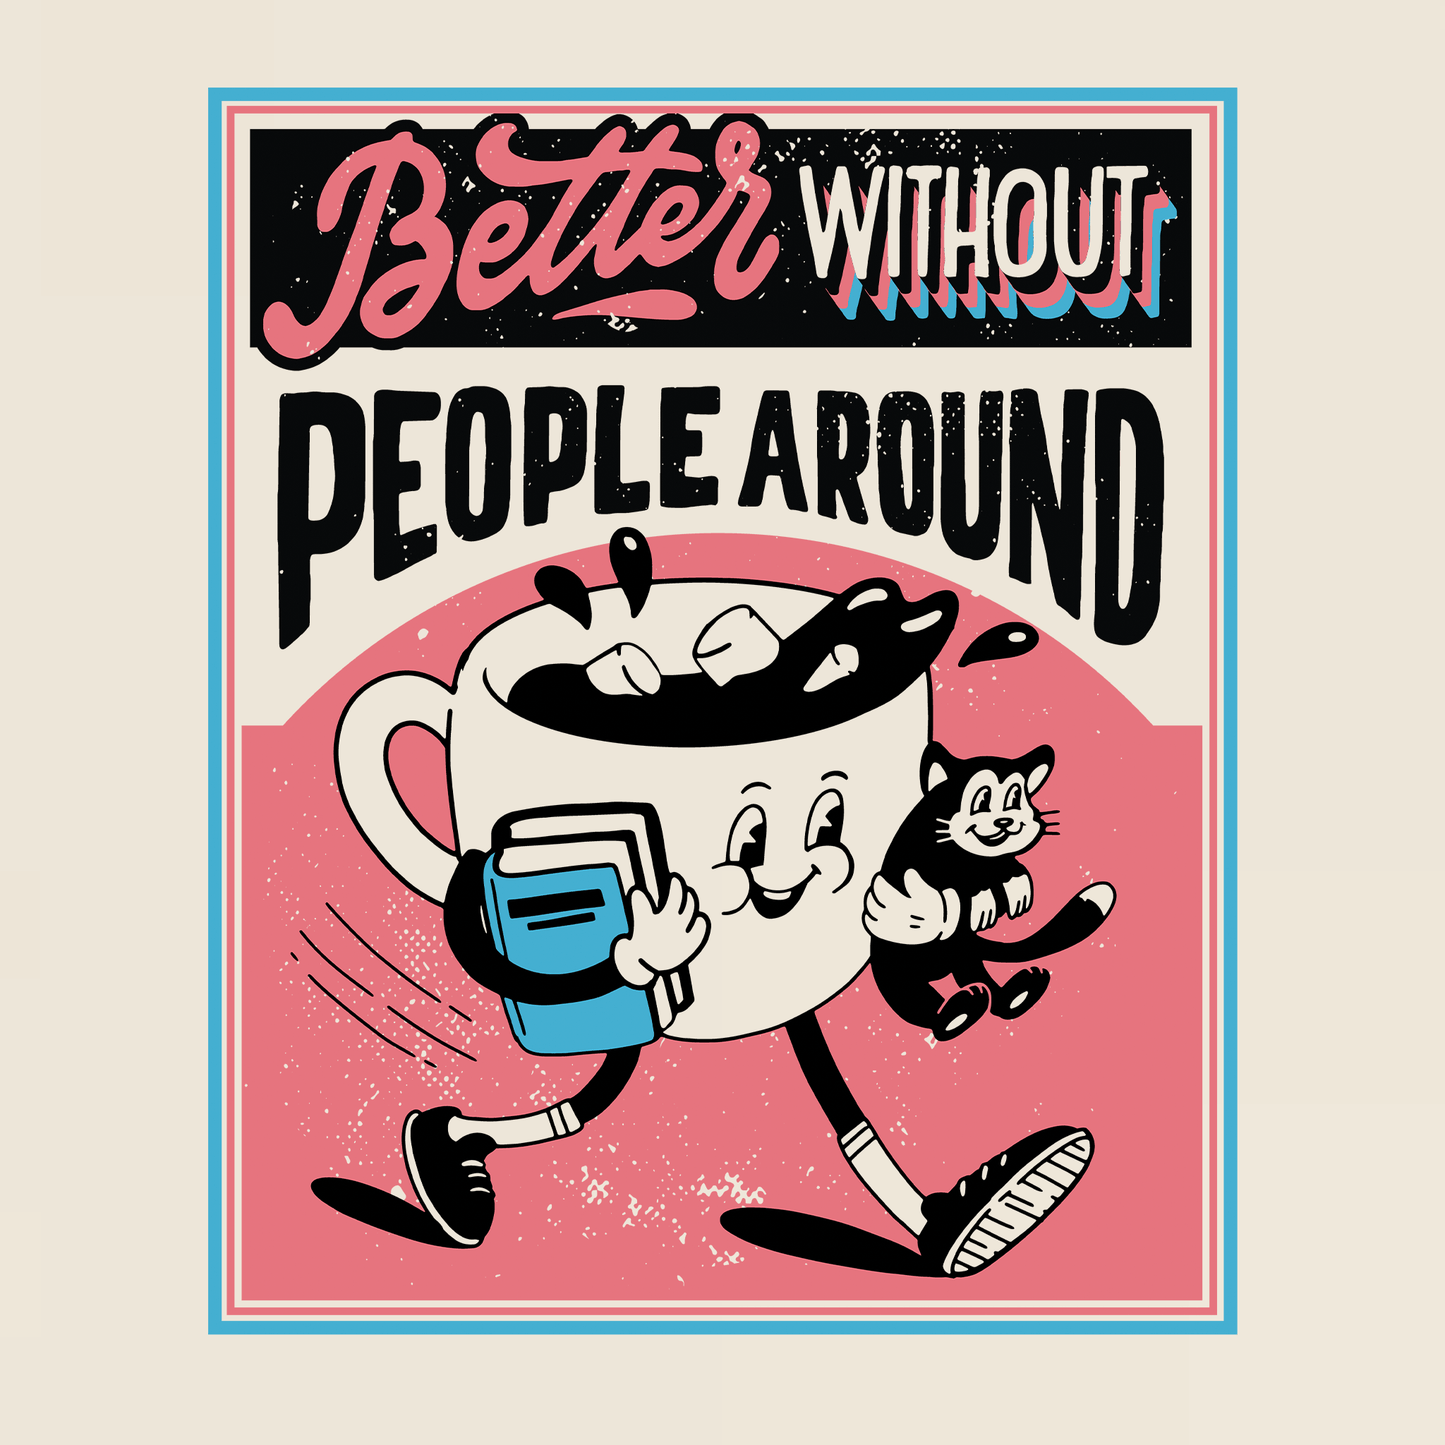 Better Without People T-Shirt